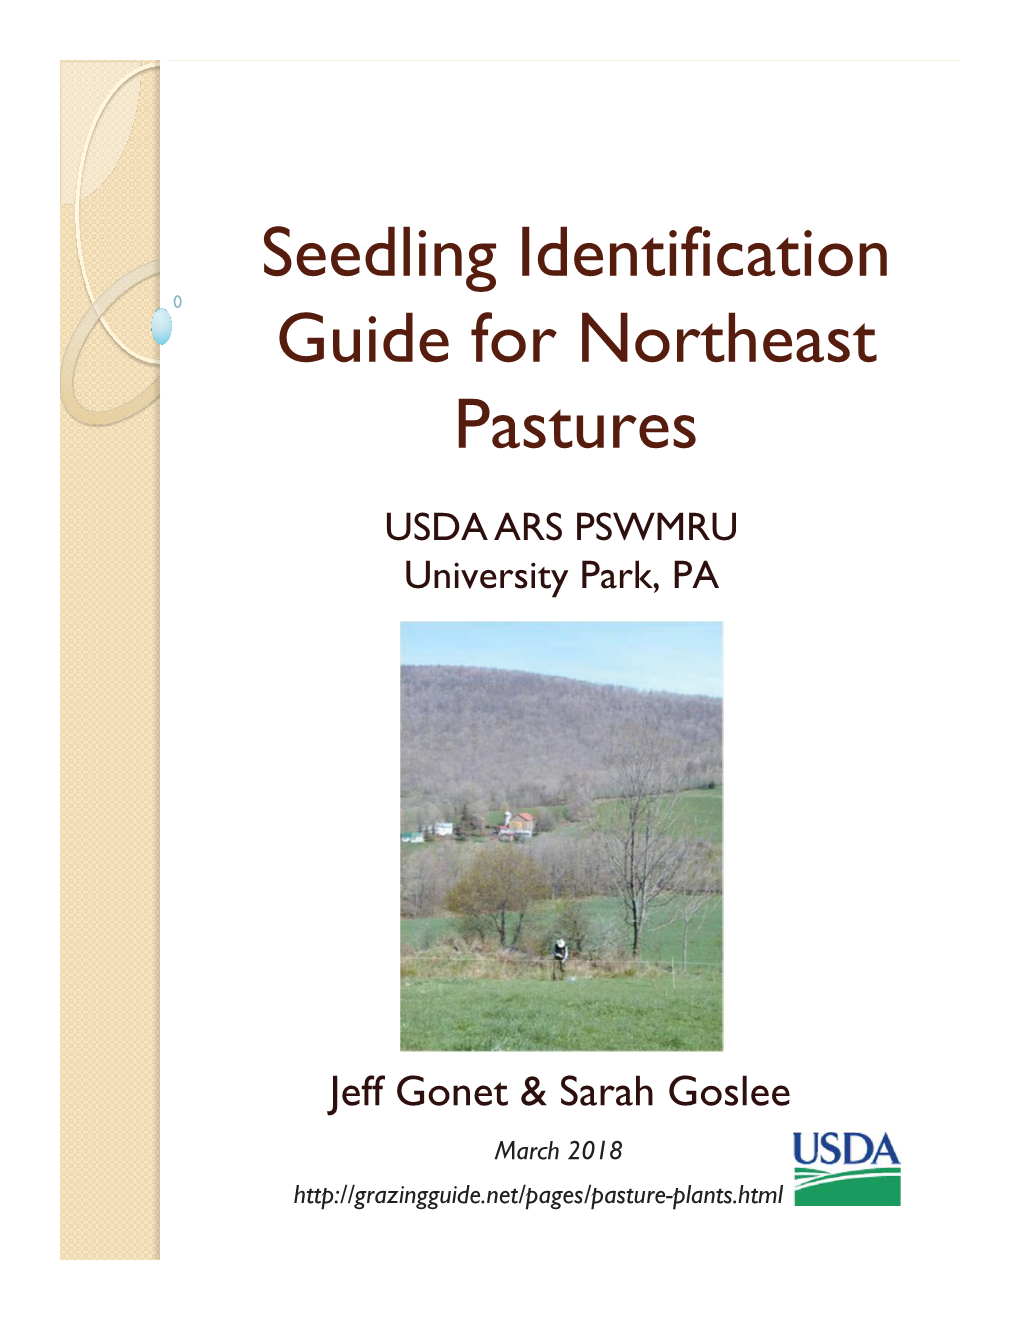 Seedling Identification Guide for Northeast Pastures